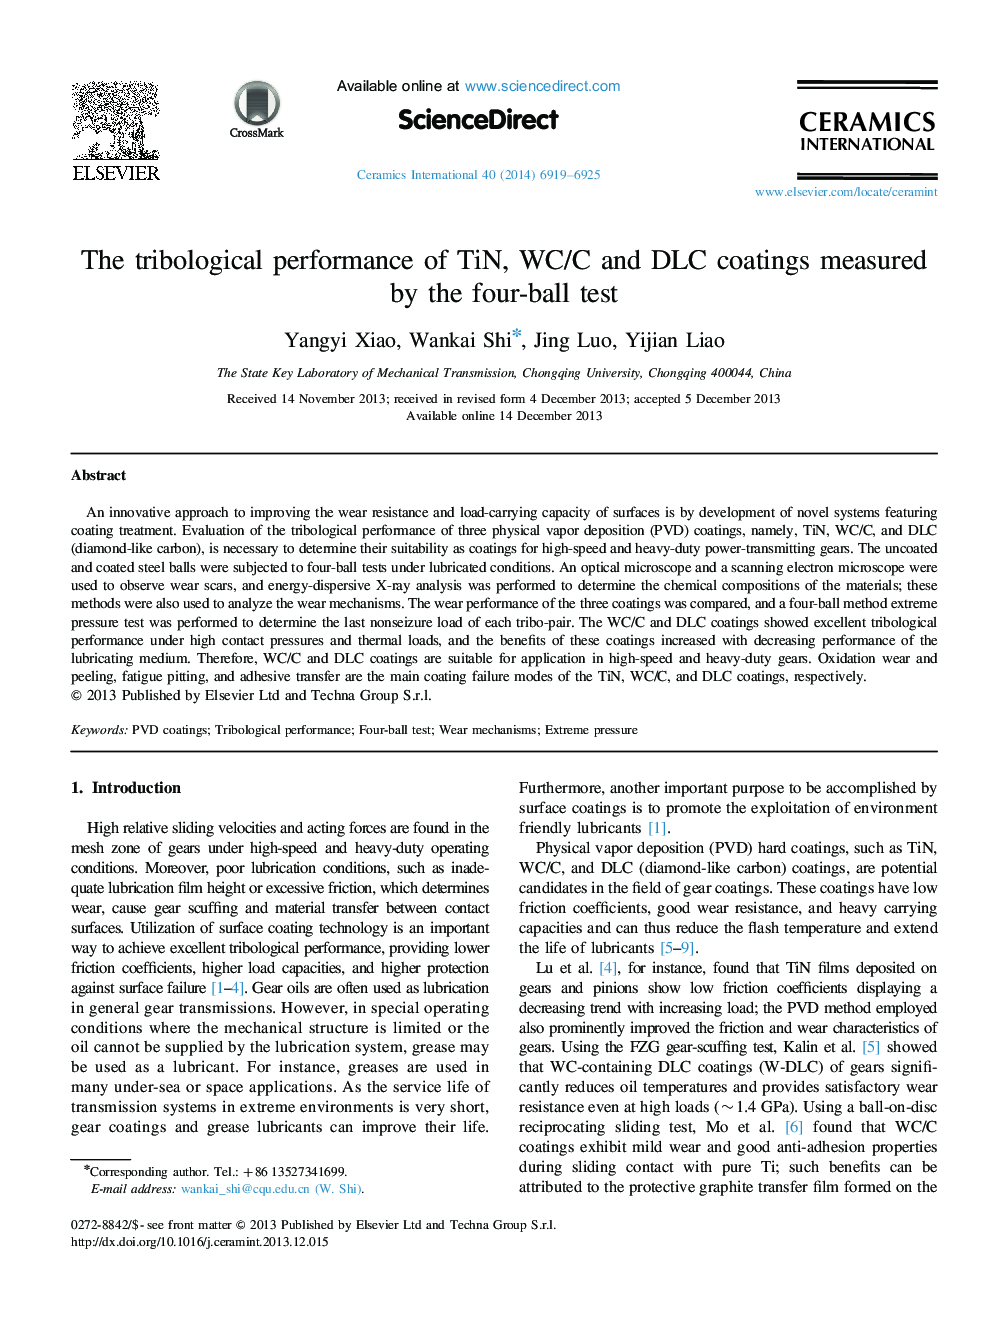 The tribological performance of TiN, WC/C and DLC coatings measured by the four-ball test